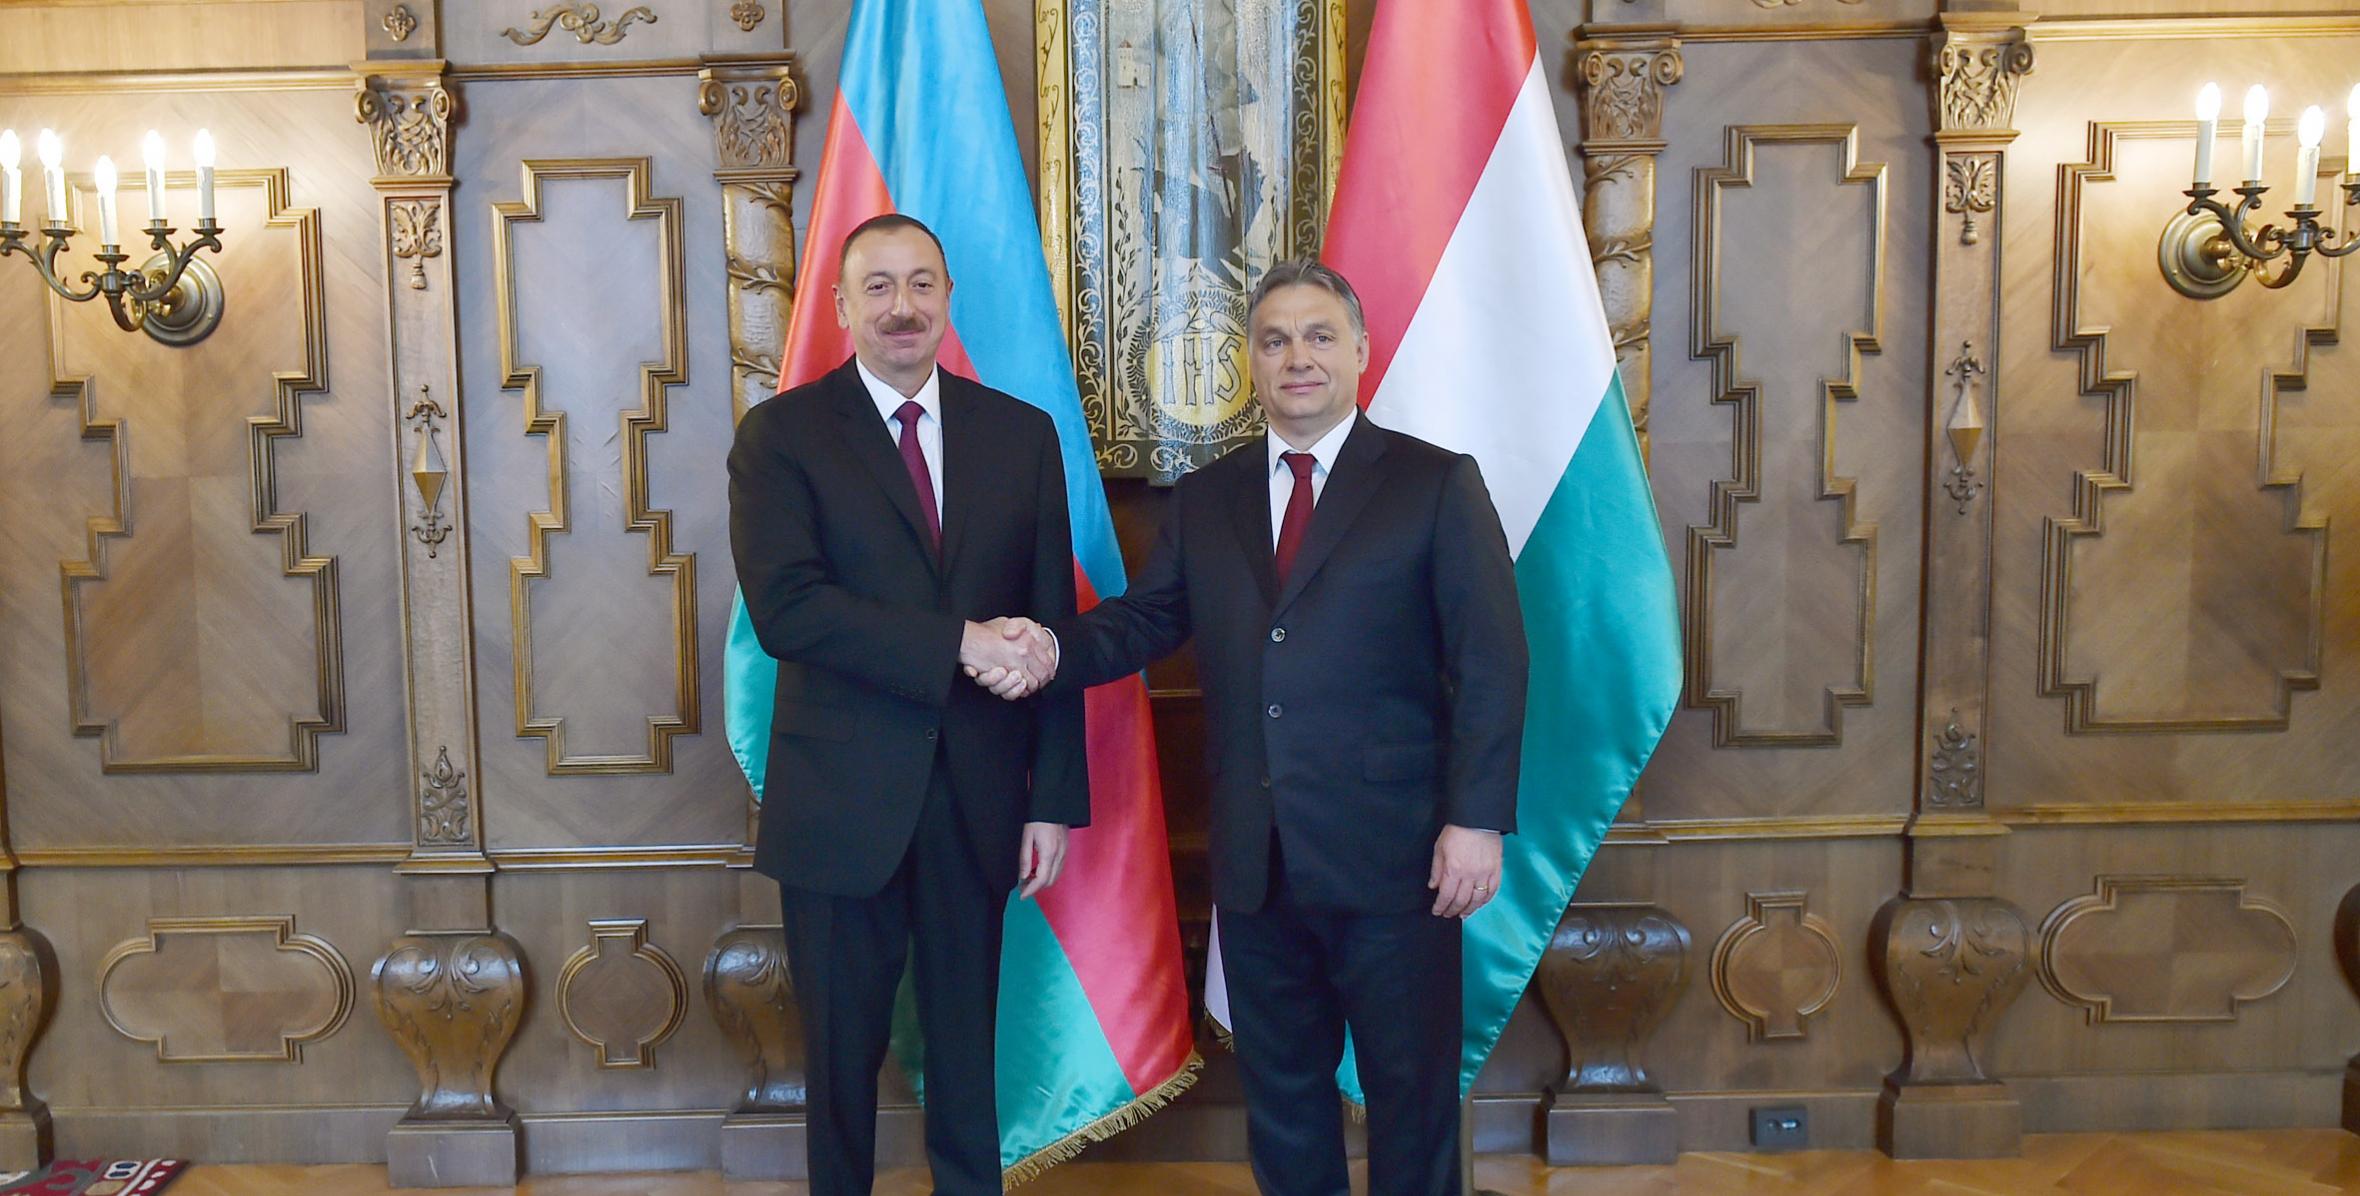 Ilham Aliyev and Hungarian Prime Minister Viktor Orban held an expanded meeting